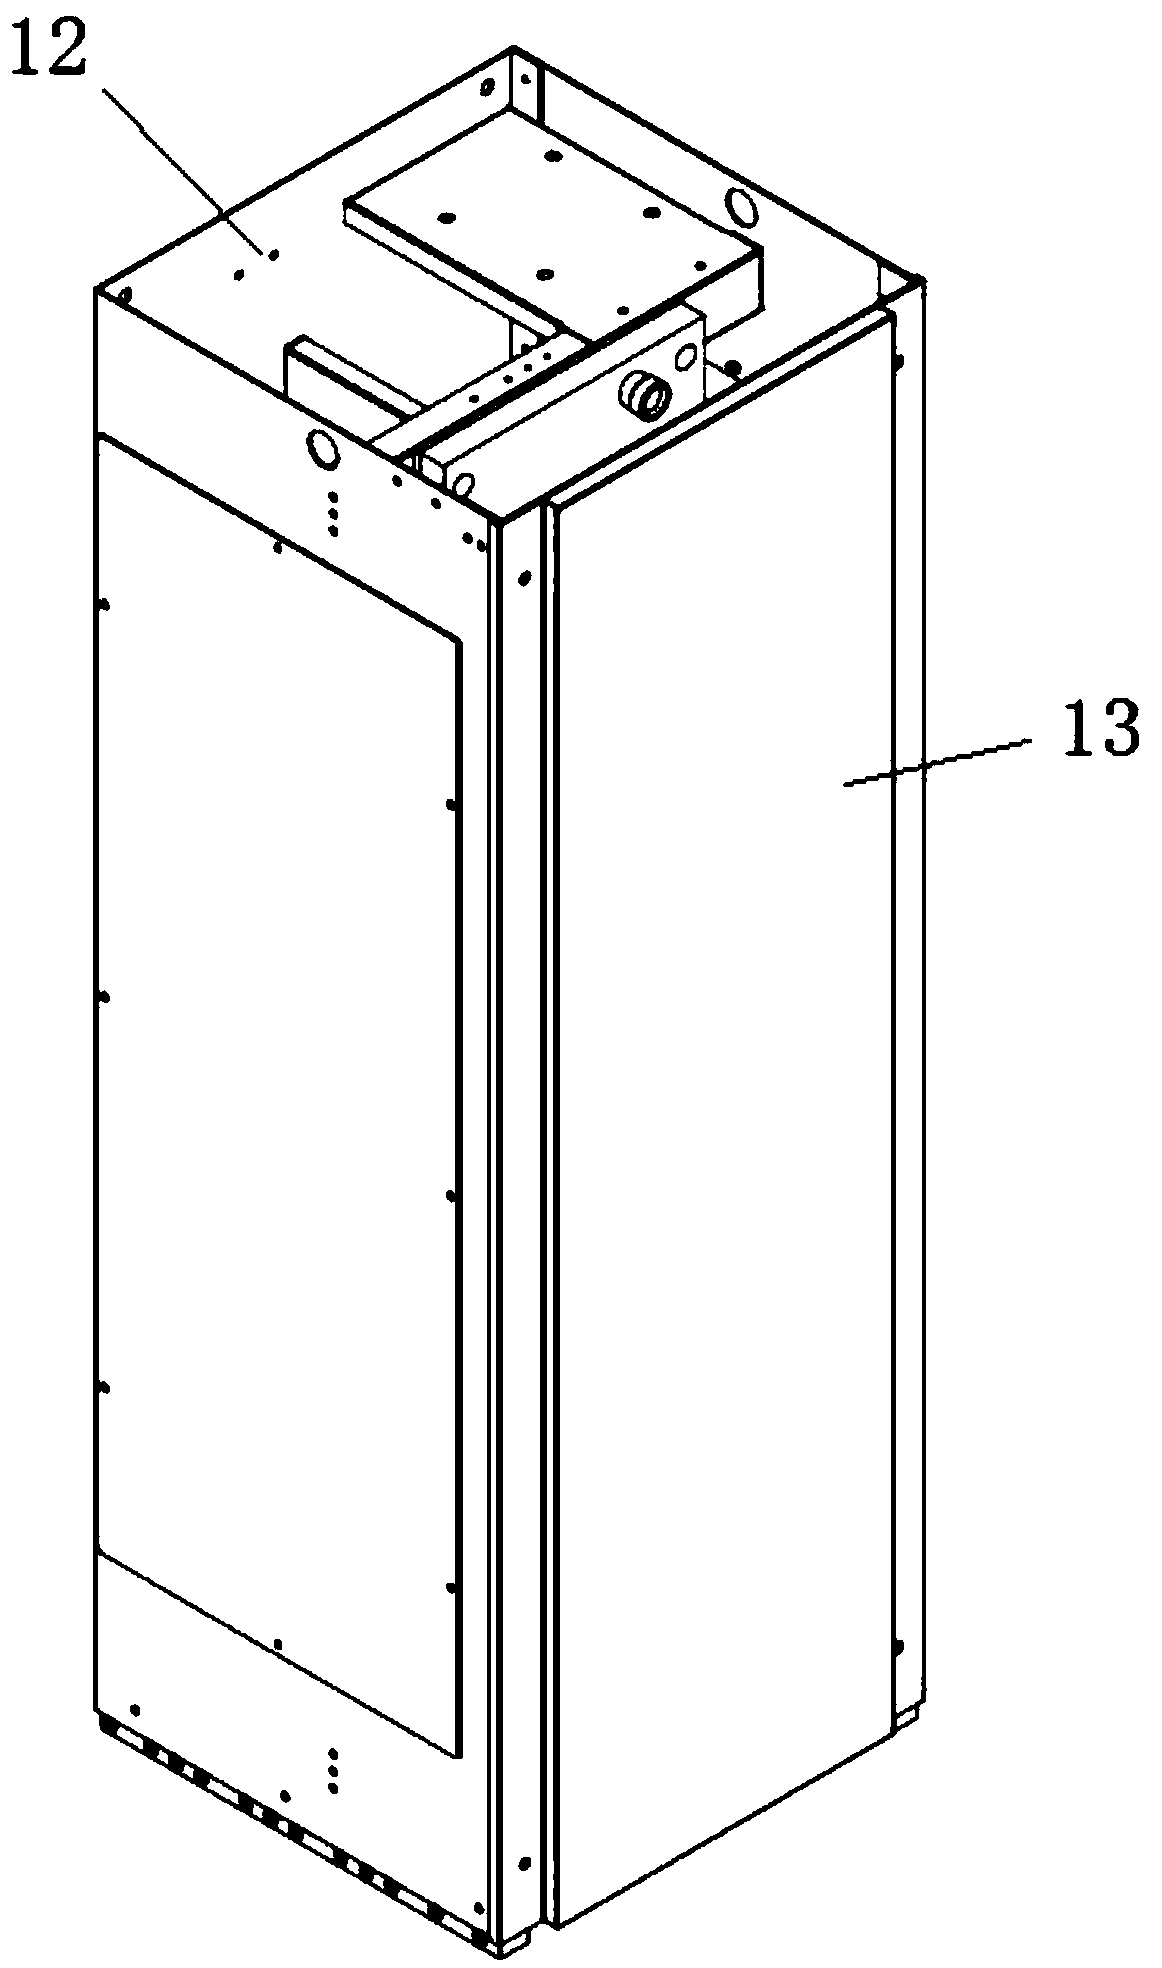 Large-capacity inverter module with high-current/high-voltage IGBT directly connected in parallel